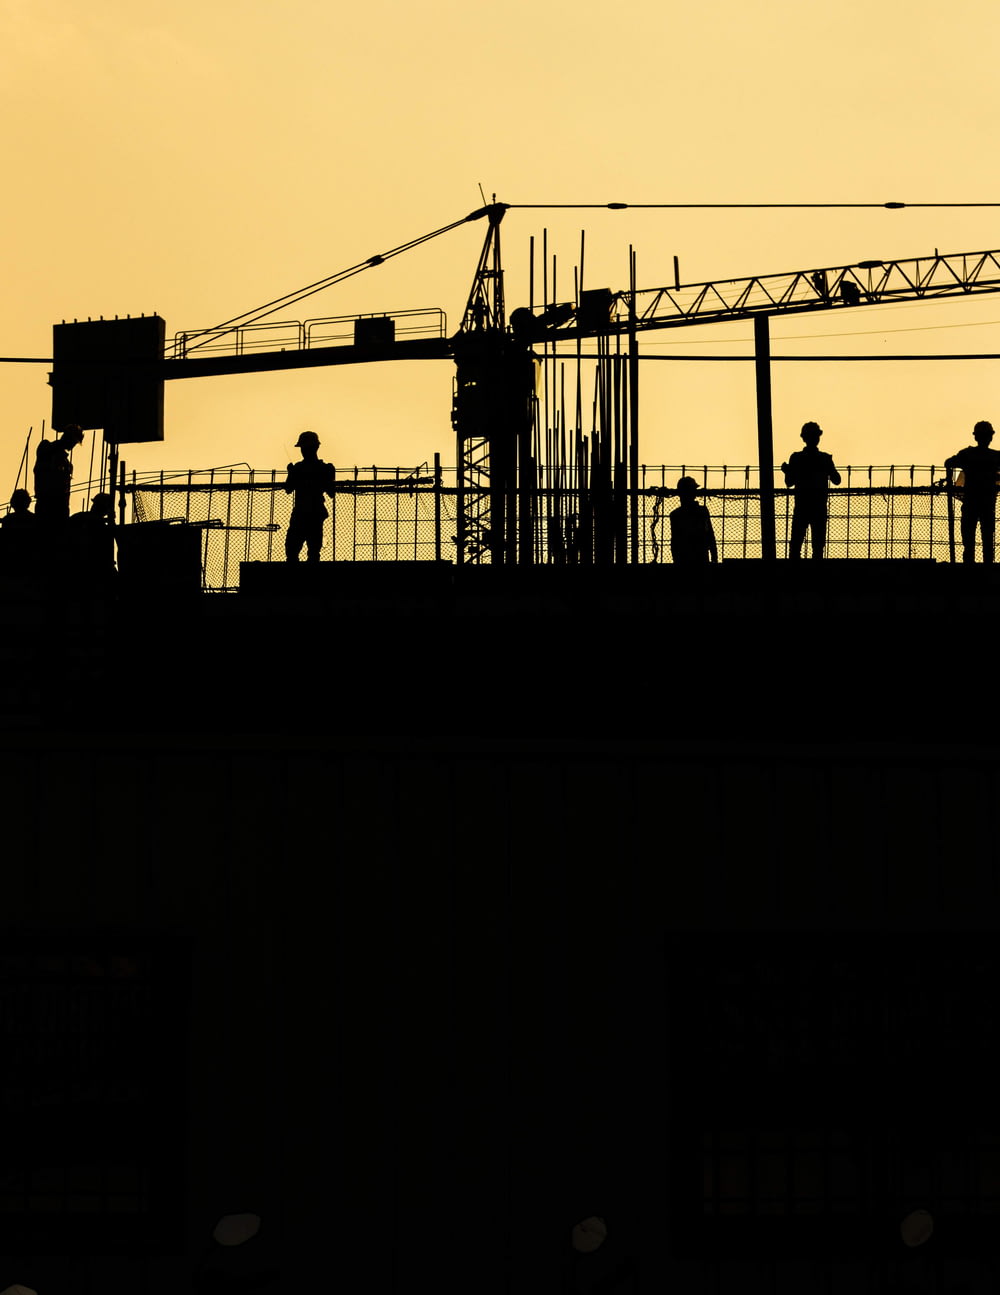 silhouette of people standing on tower crane during night time